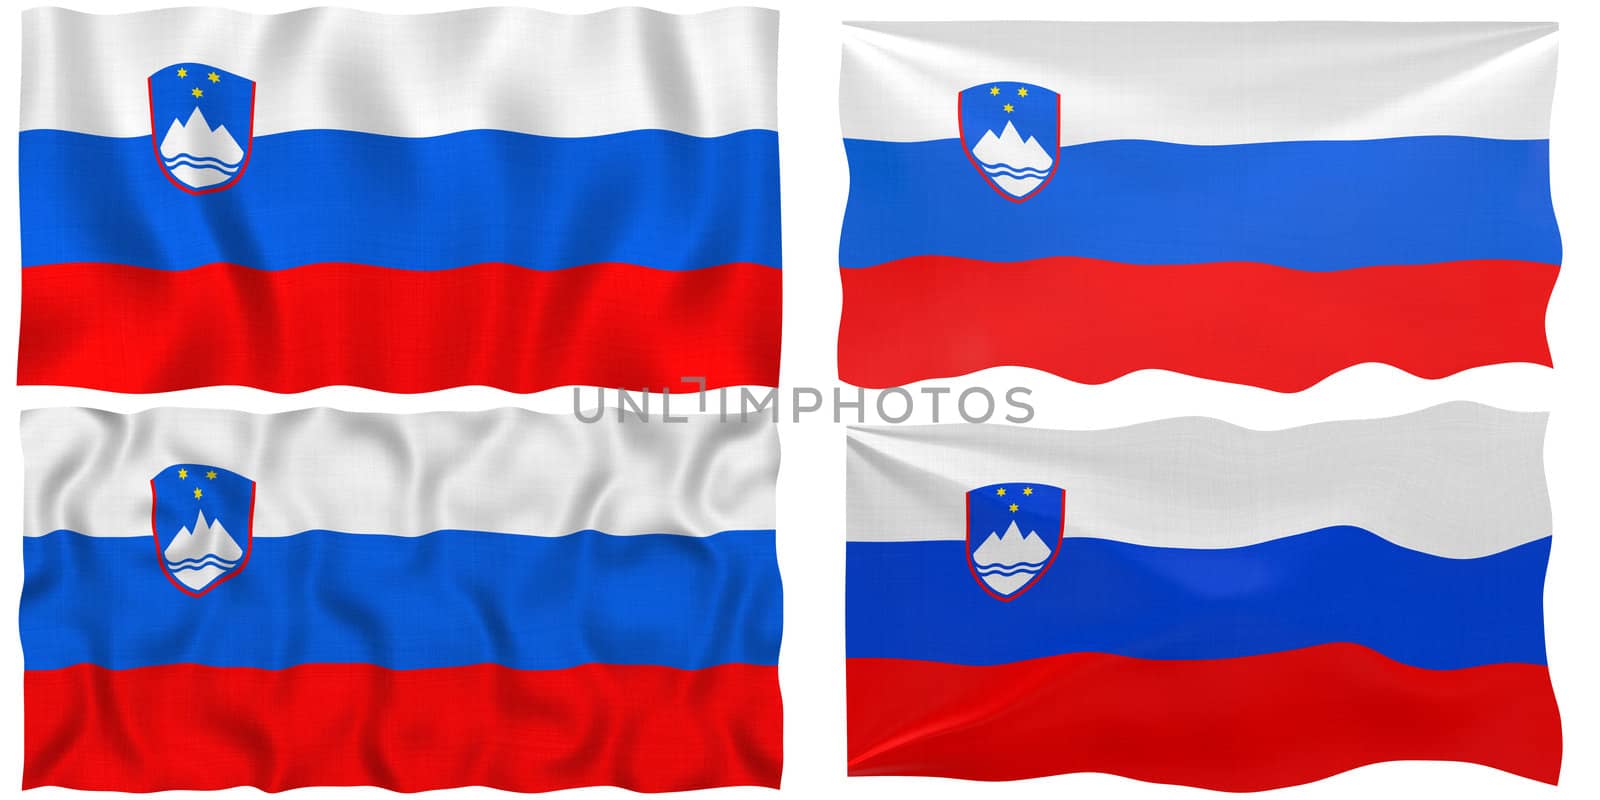 Great Image of the Flag of Slovenia